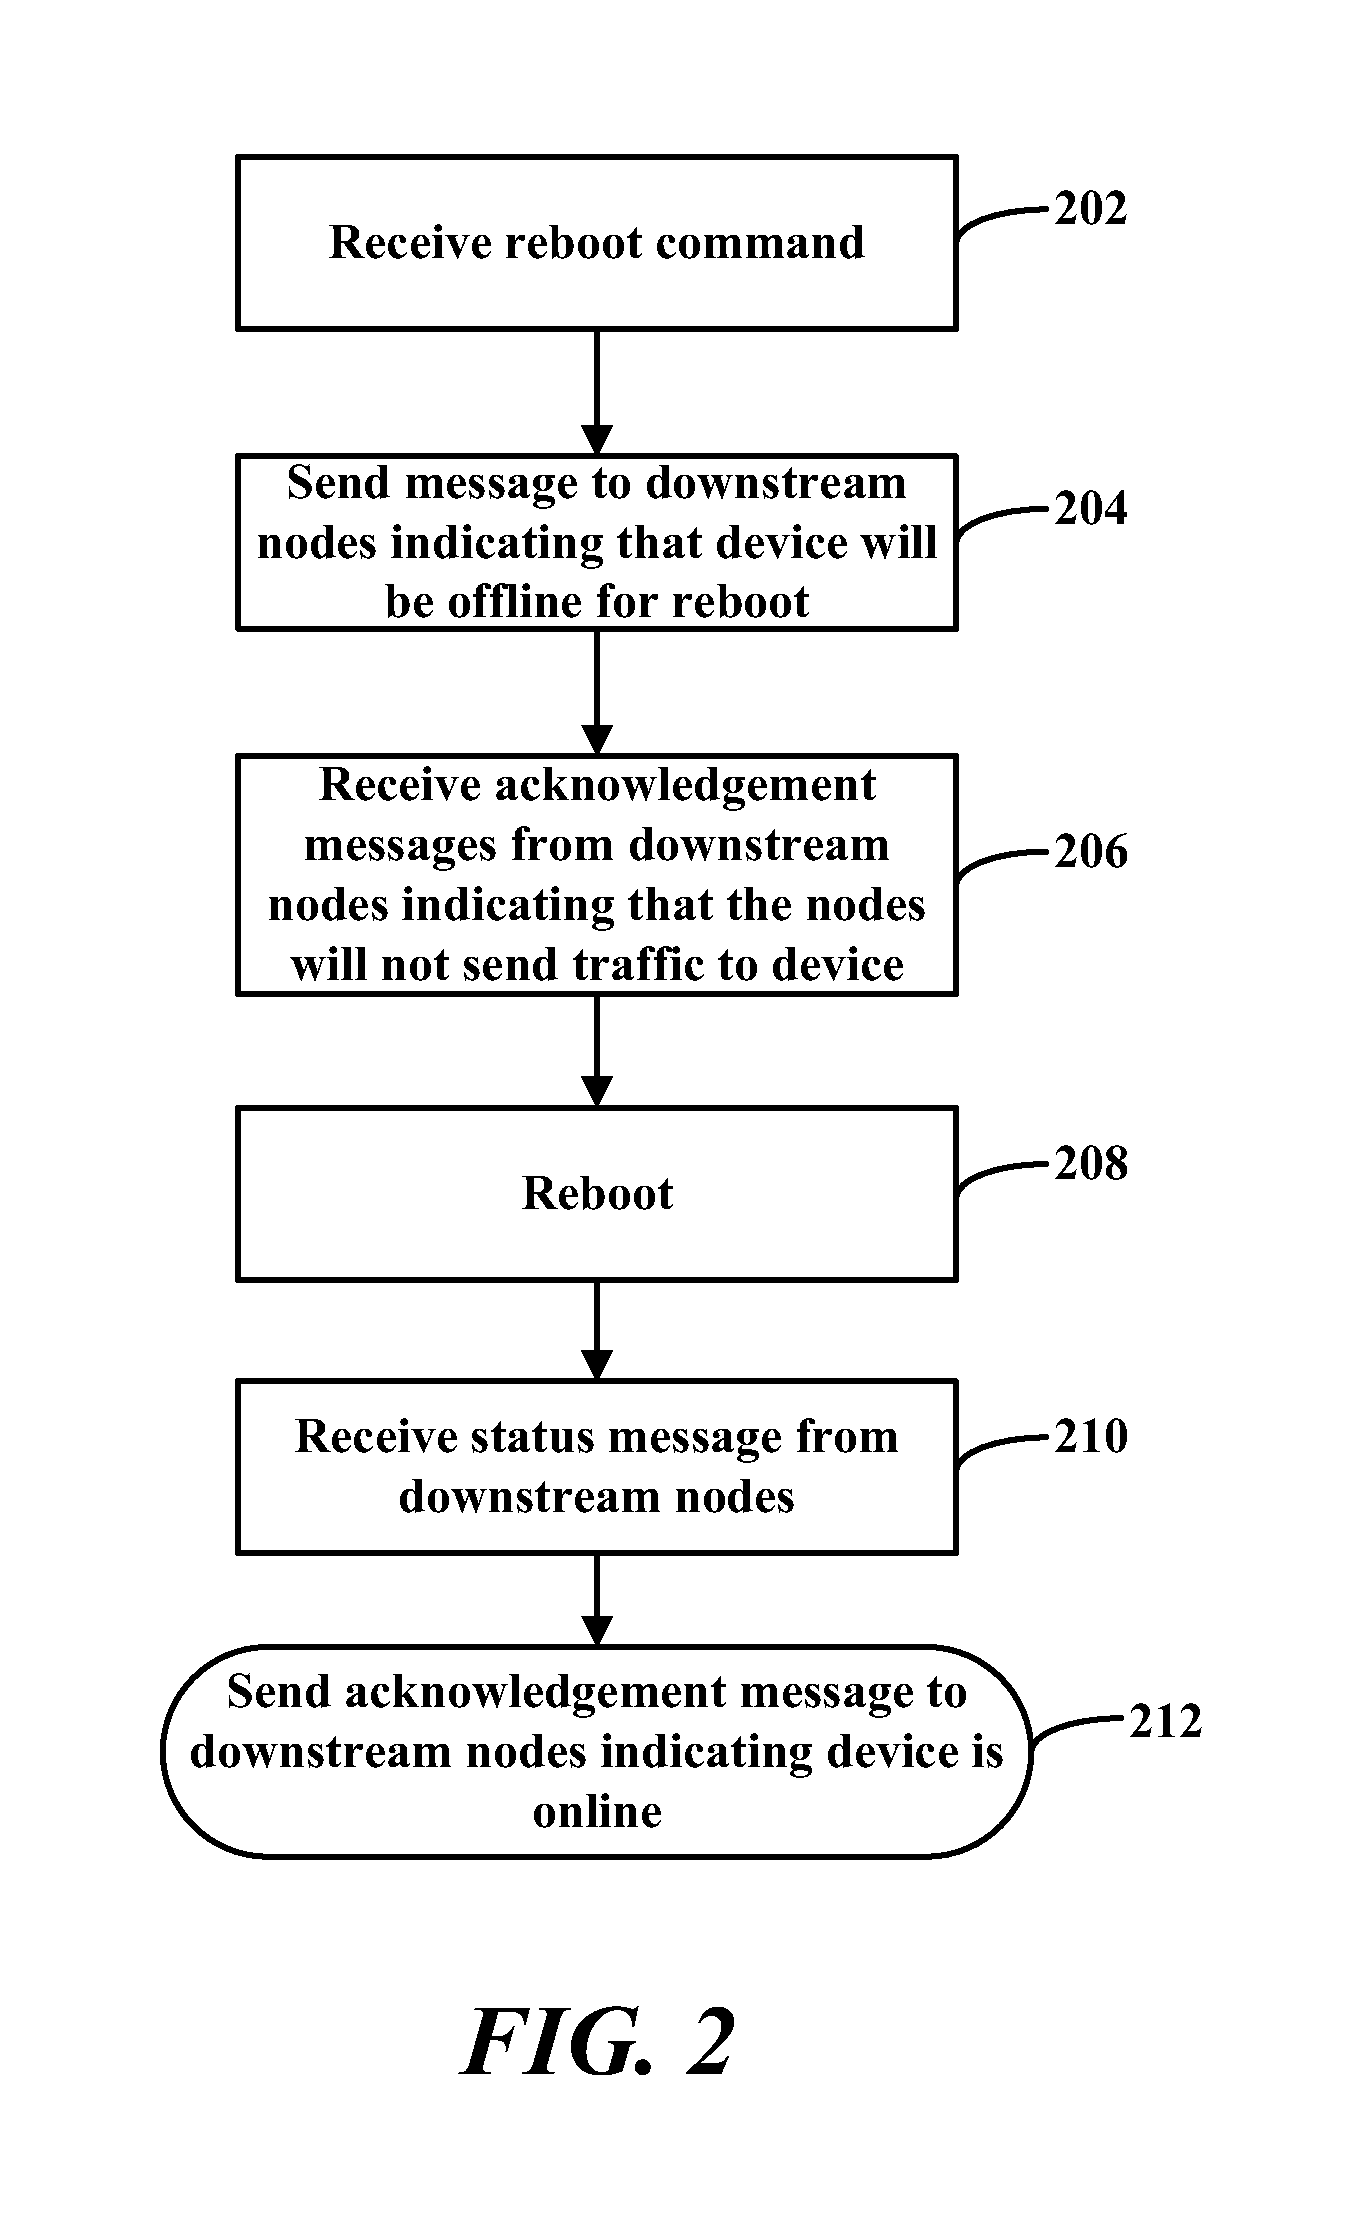 System and method for reducing information loss in an aggregated information handling system